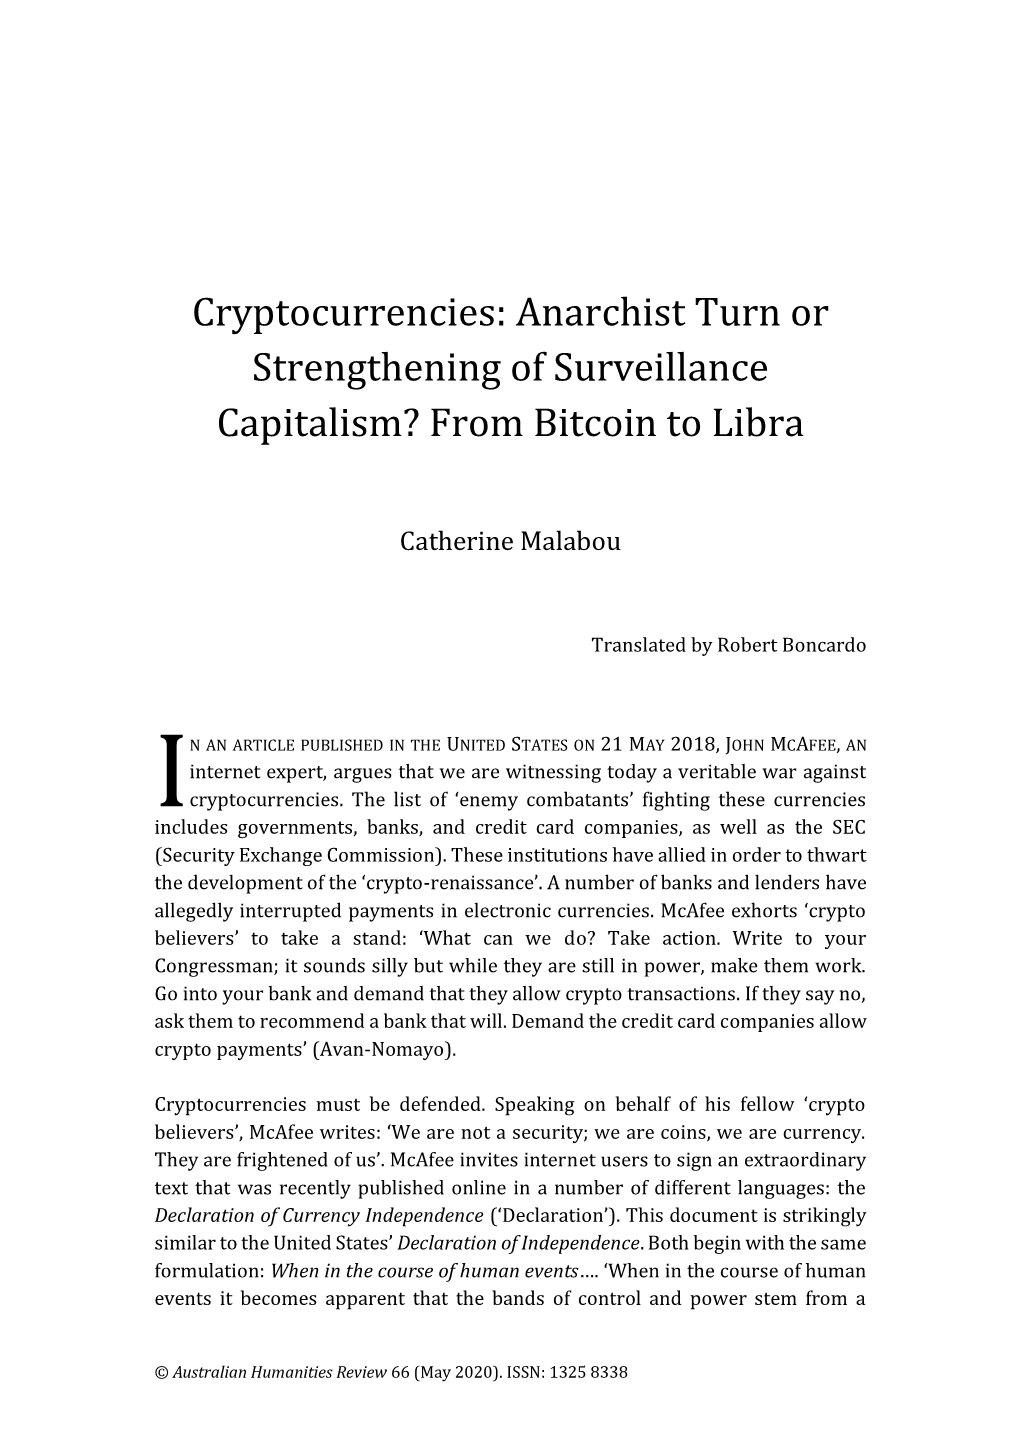 Anarchist Turn Or Strengthening of Surveillance Capitalism? from Bitcoin to Libra